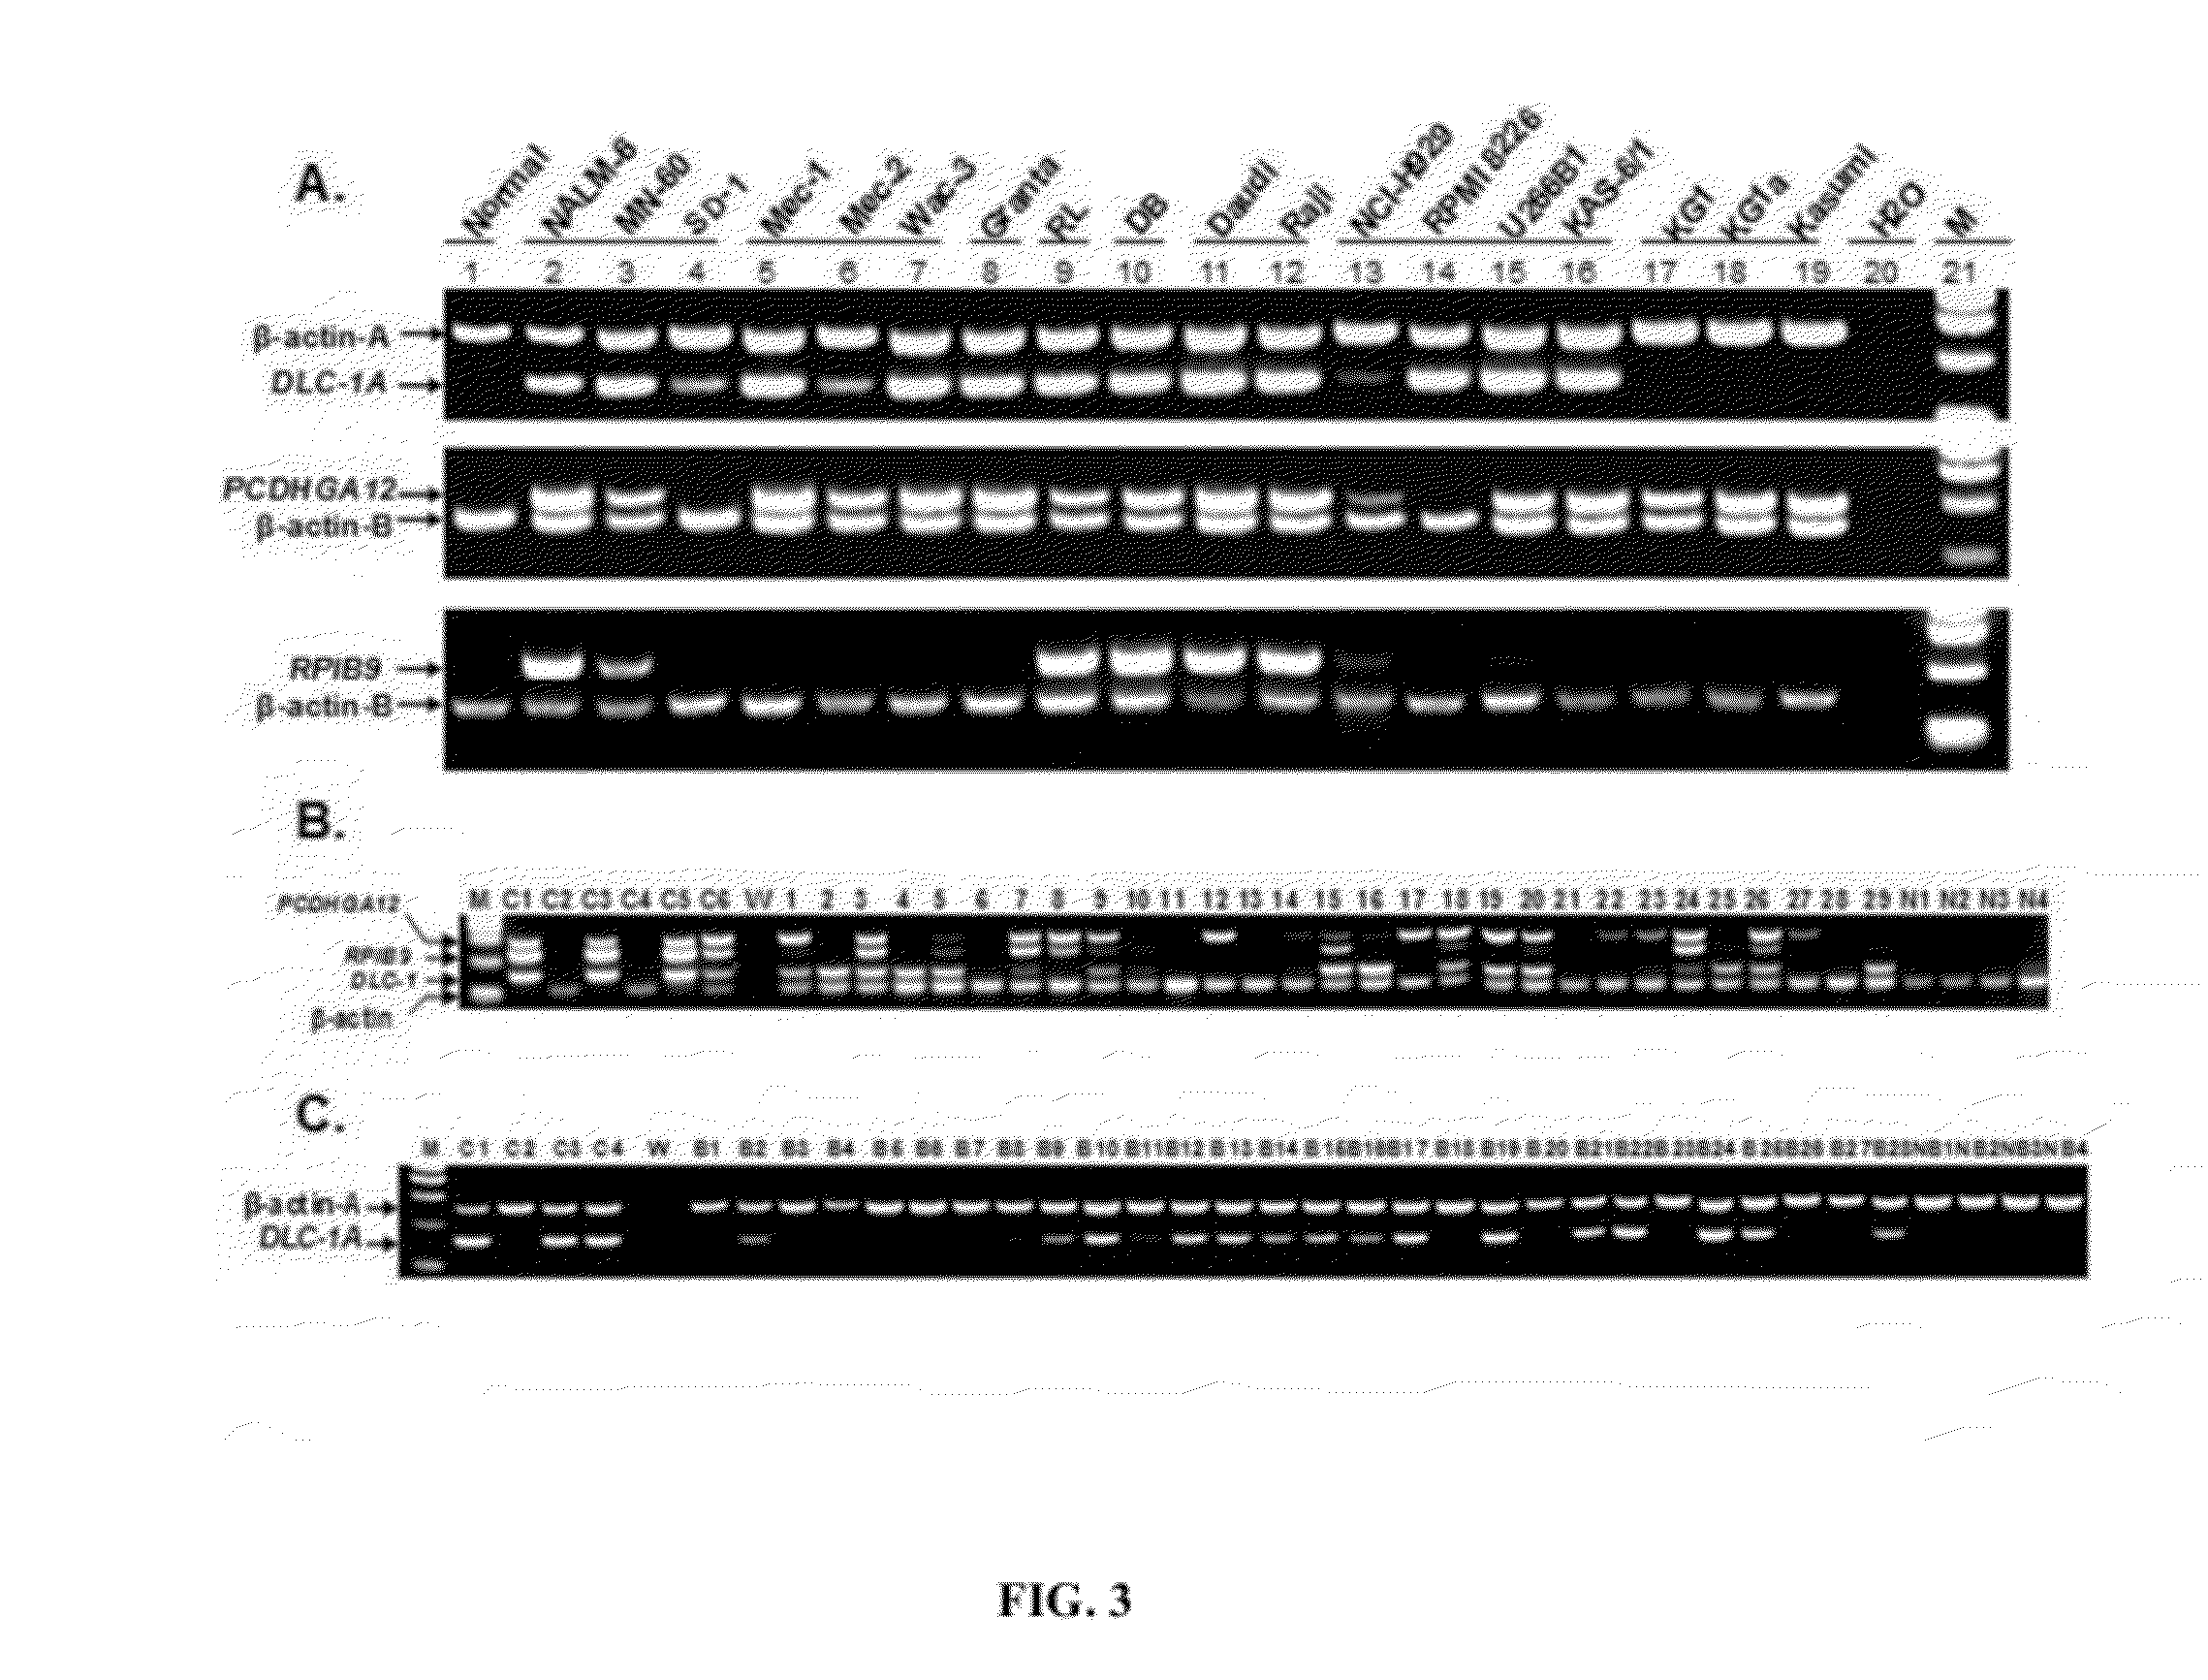 Methods for detecting rare circulating cancer cells using DNA methylation biomarkers